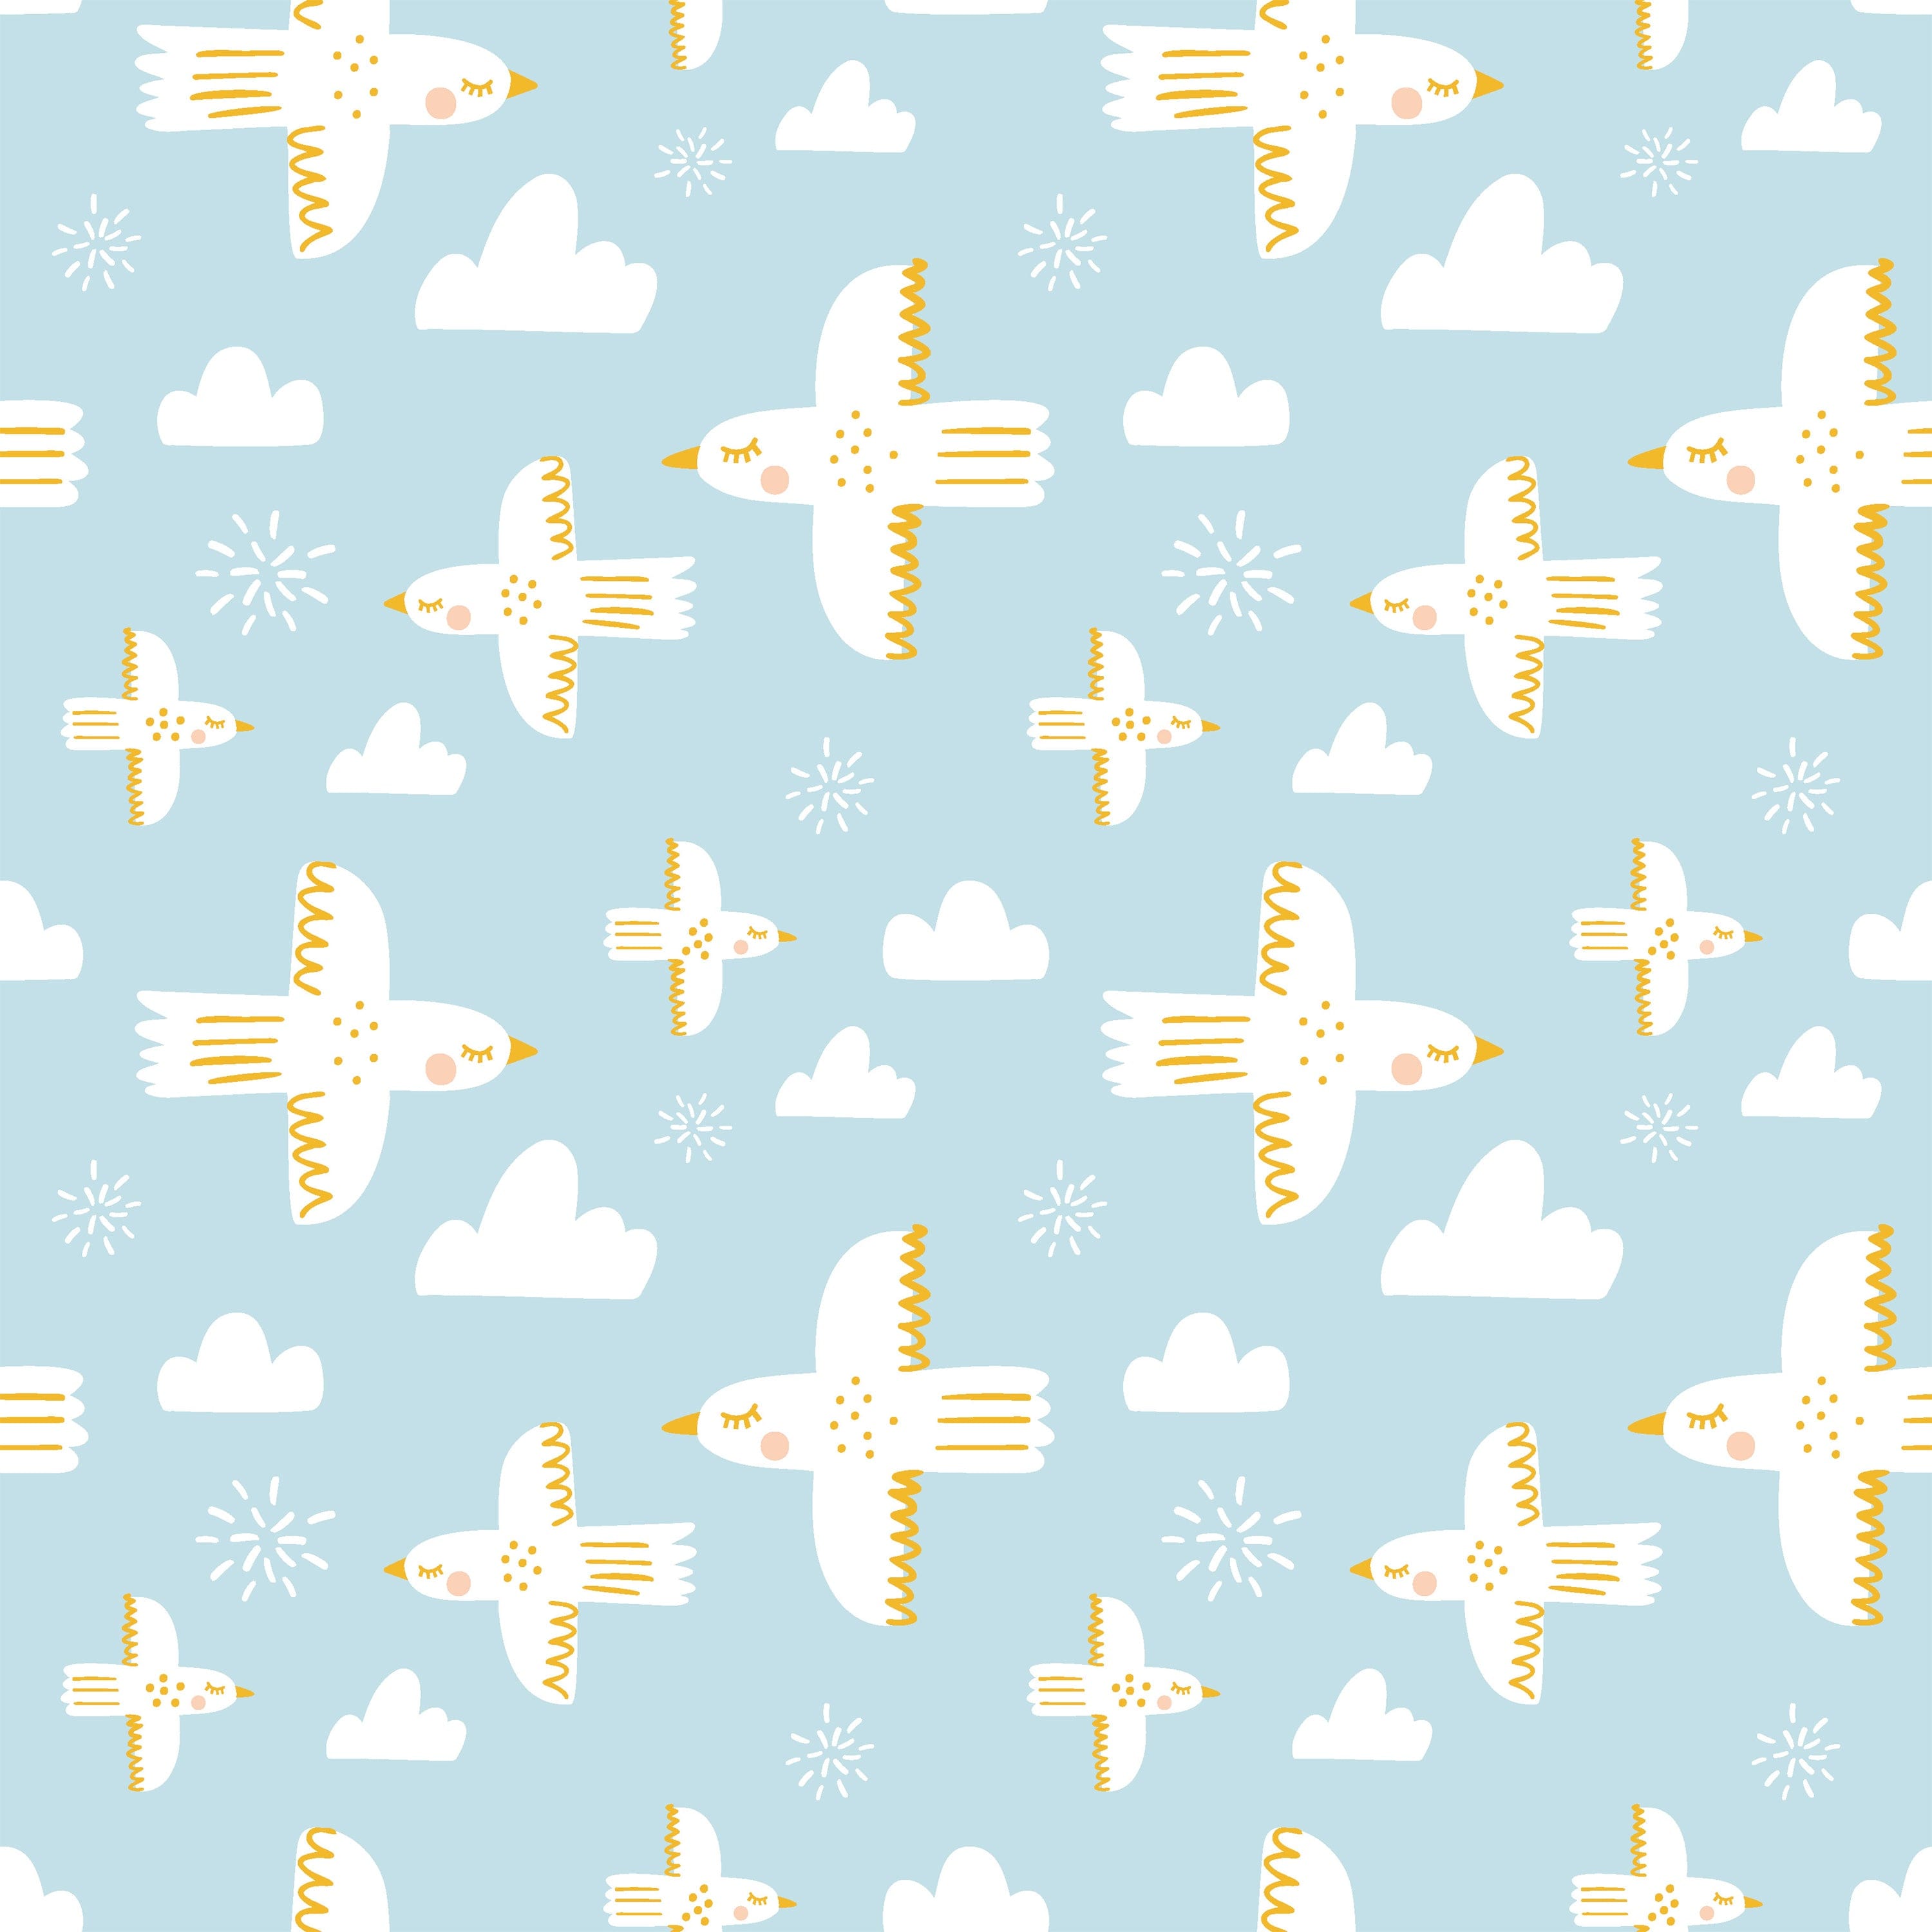 Charming wallpaper featuring a pattern of white birds in dynamic flight among clouds and scattered stars, set against a soft blue sky background, creating a sense of freedom and whimsy.